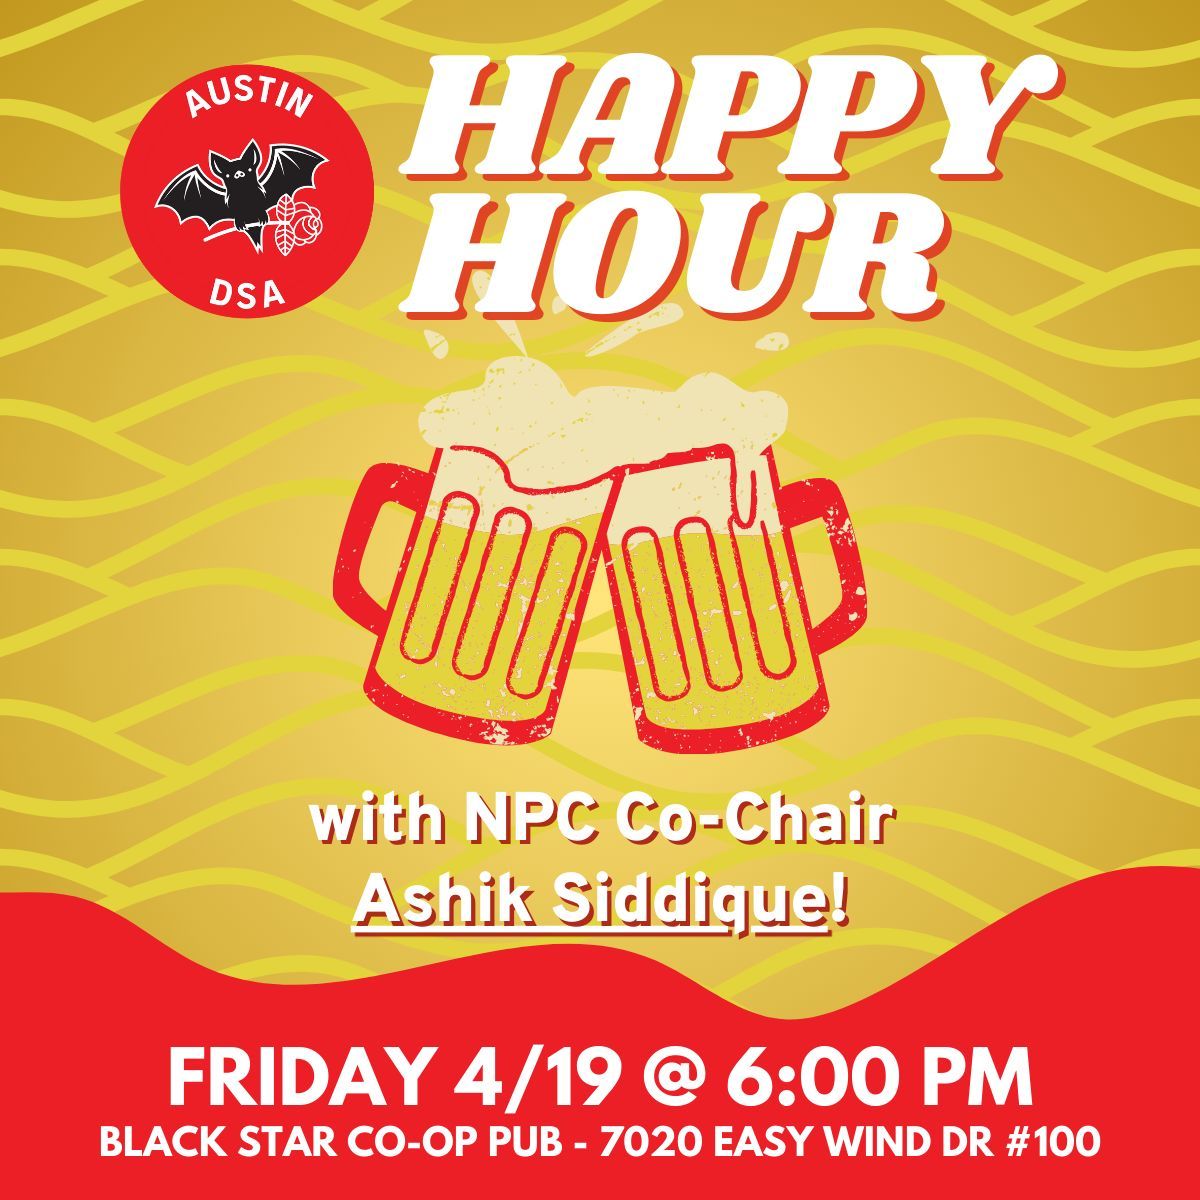 Join us in welcoming the Co-Chair of our National Political Committee to Austin! Ashik will be hanging out specifically to talk about the state of DSA and to hear your thoughts on our organization in this political moment. All are welcome--come by Black Star Co-op at 6PM!